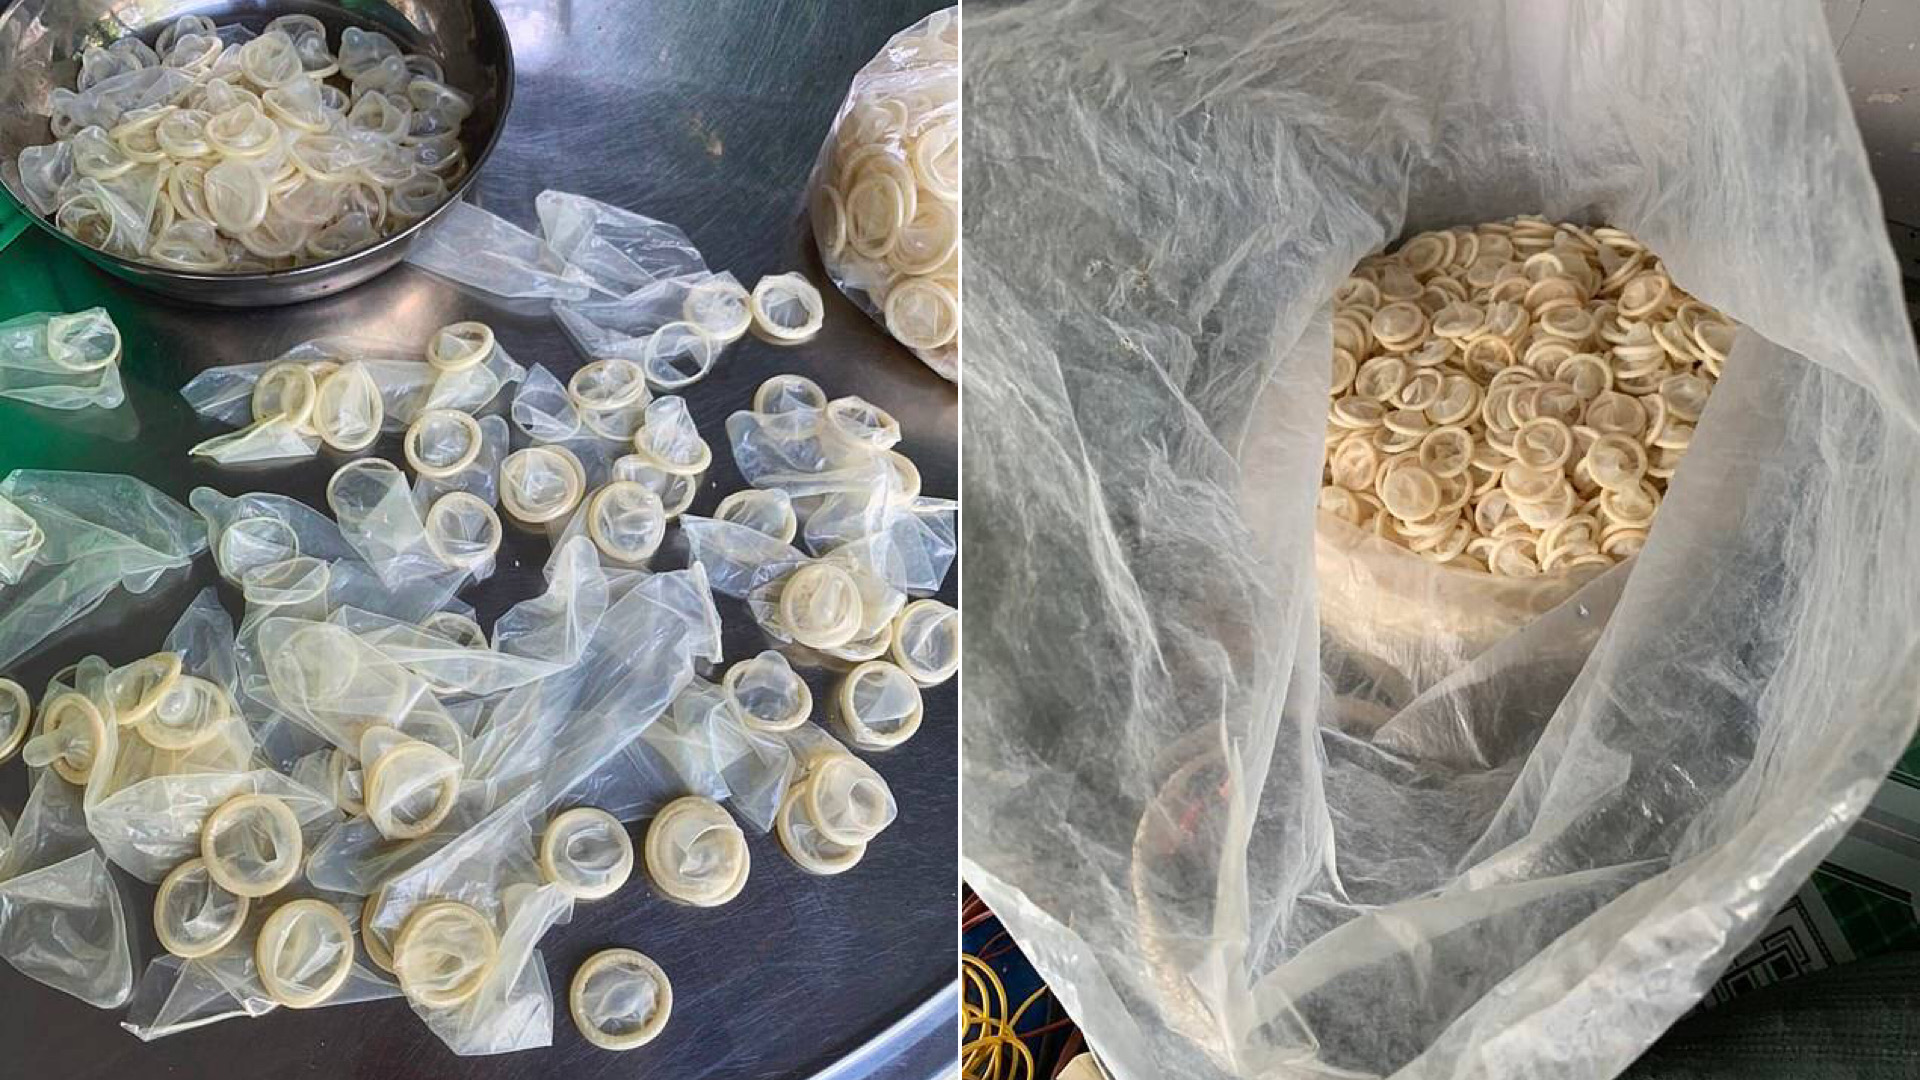 Police Seize 324,000 Used Condoms From Factory Repackaging, Reselling Them